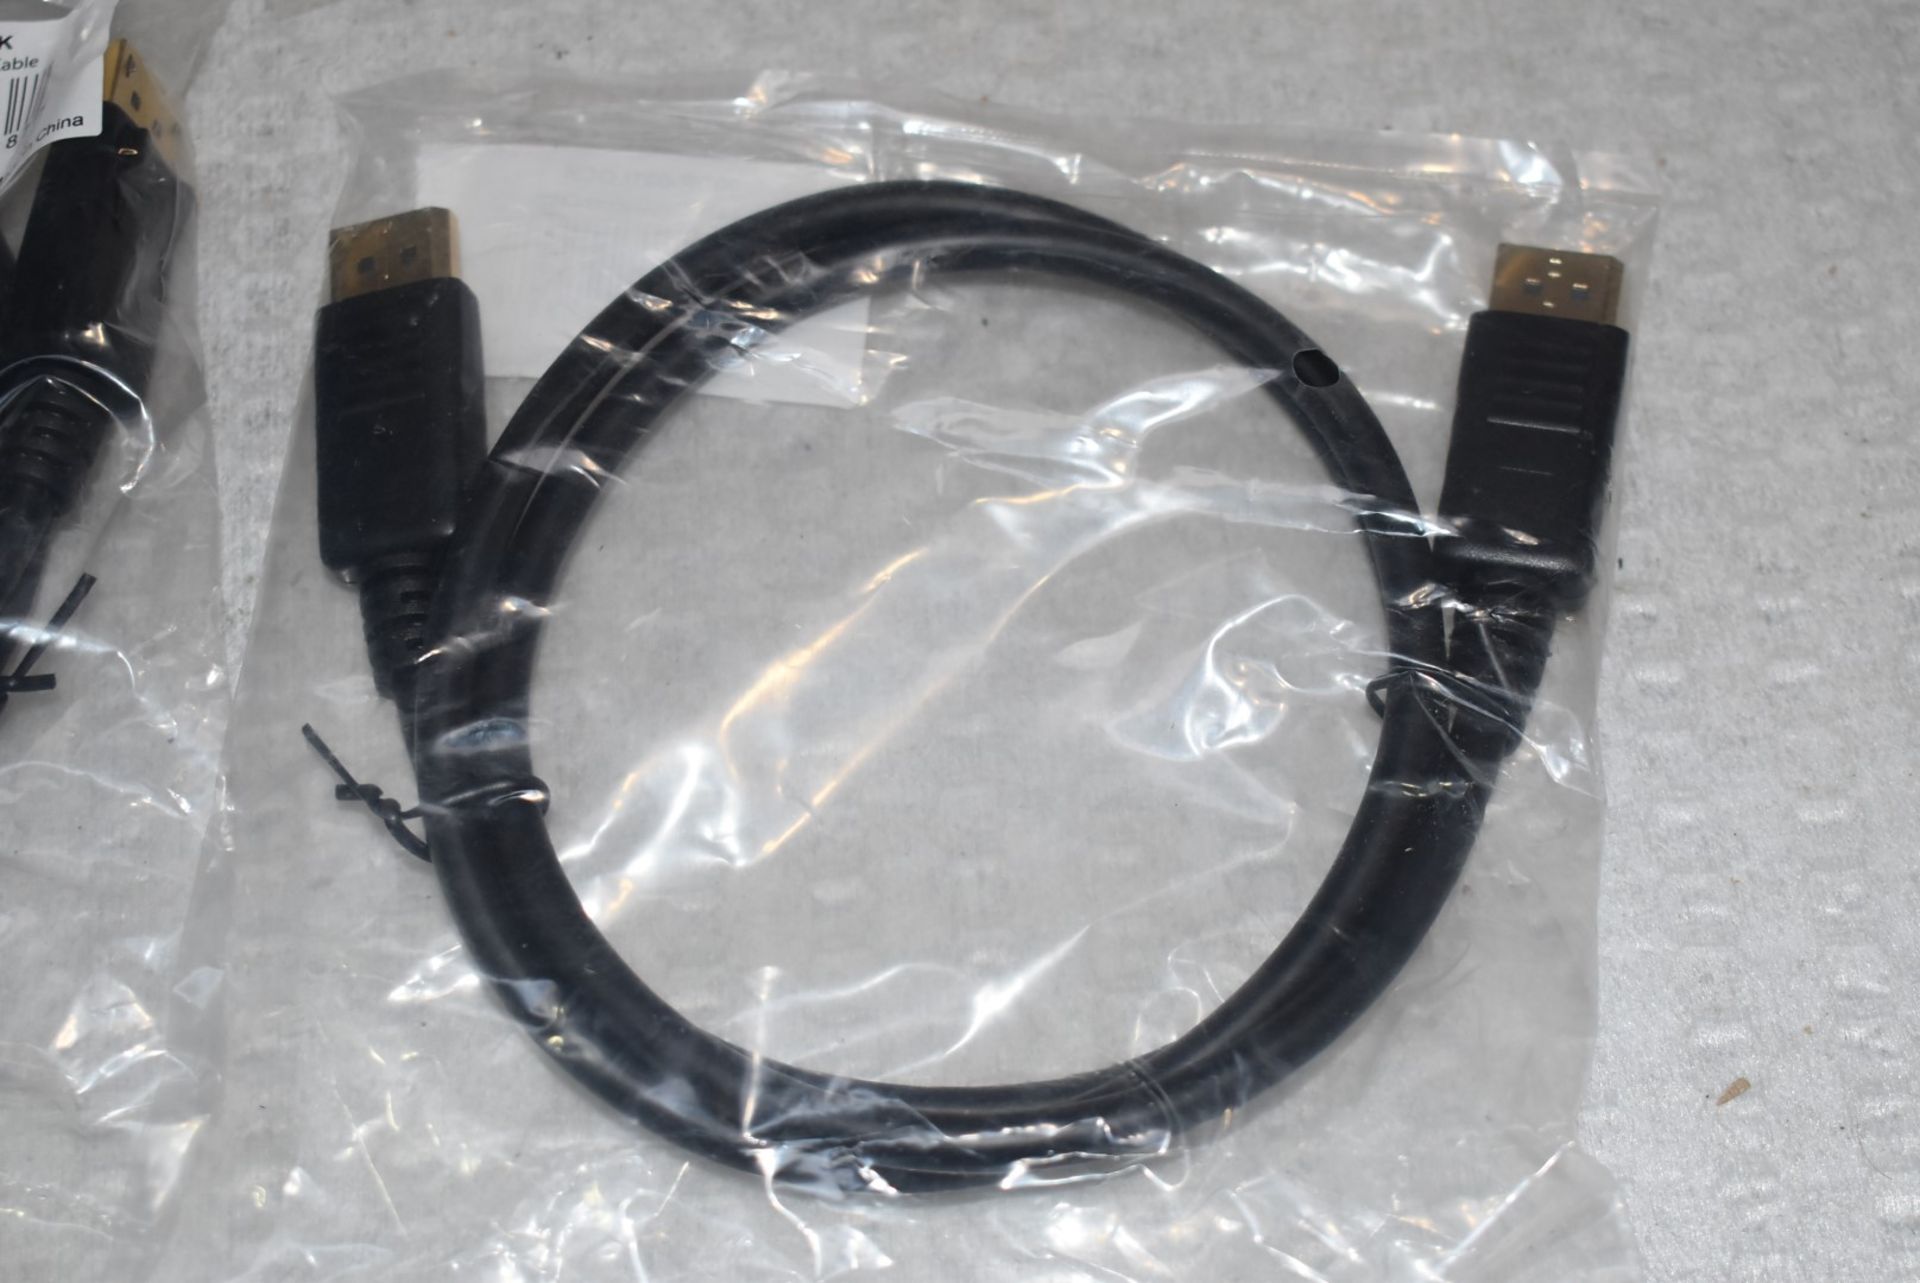 4 x DisplayPort 1 Meter Monitor Cables - New in Packets - Image 6 of 7